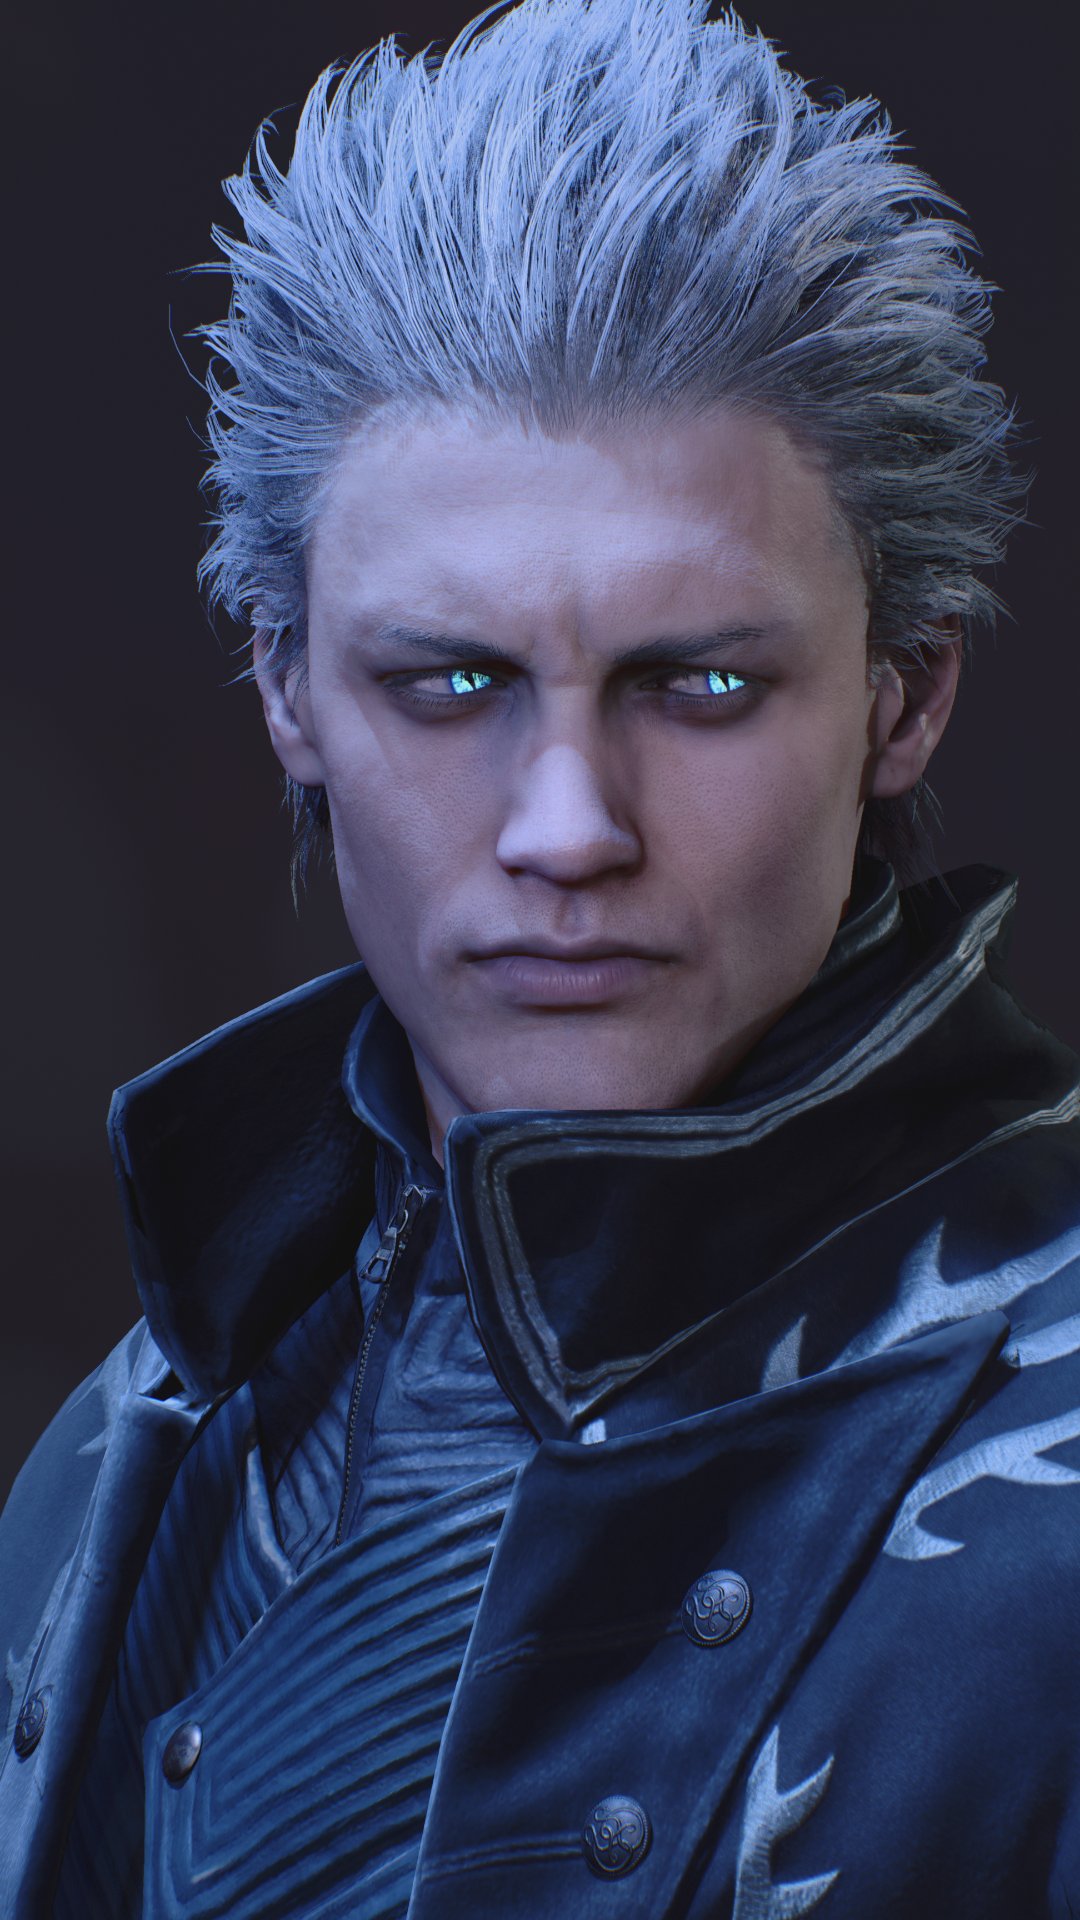 Drusoona (Vergil lover💙) on X: RT @arvalileth: I went wild with